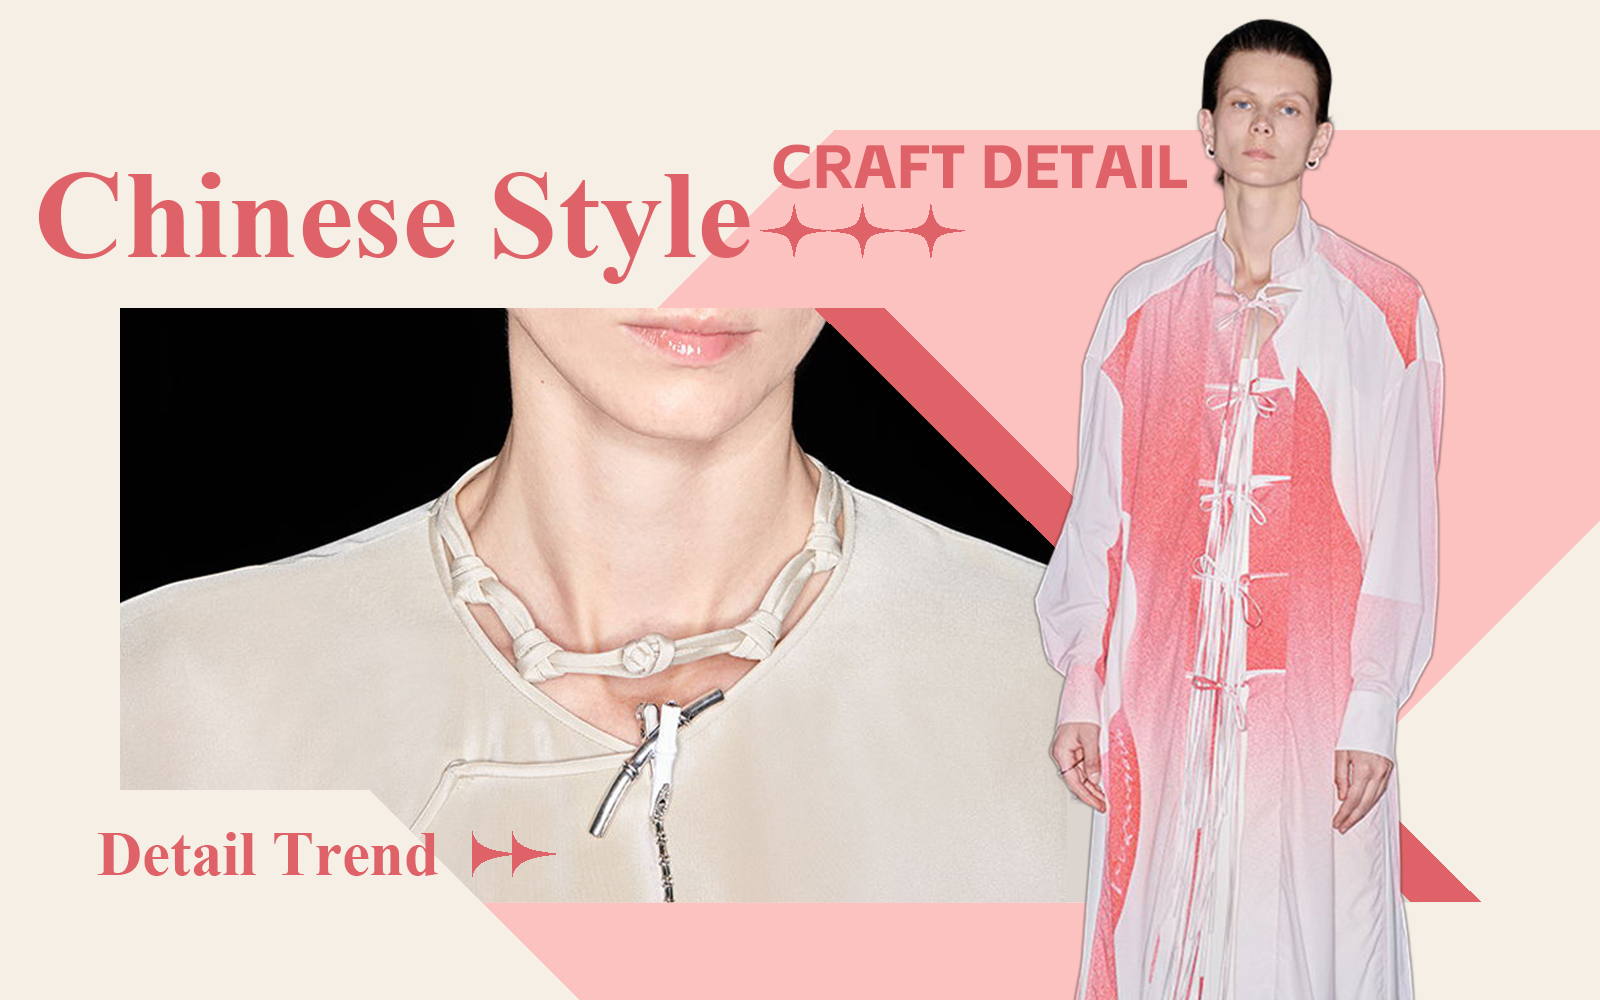 The Detail & Craft Trend for Chinese-style Womenswear